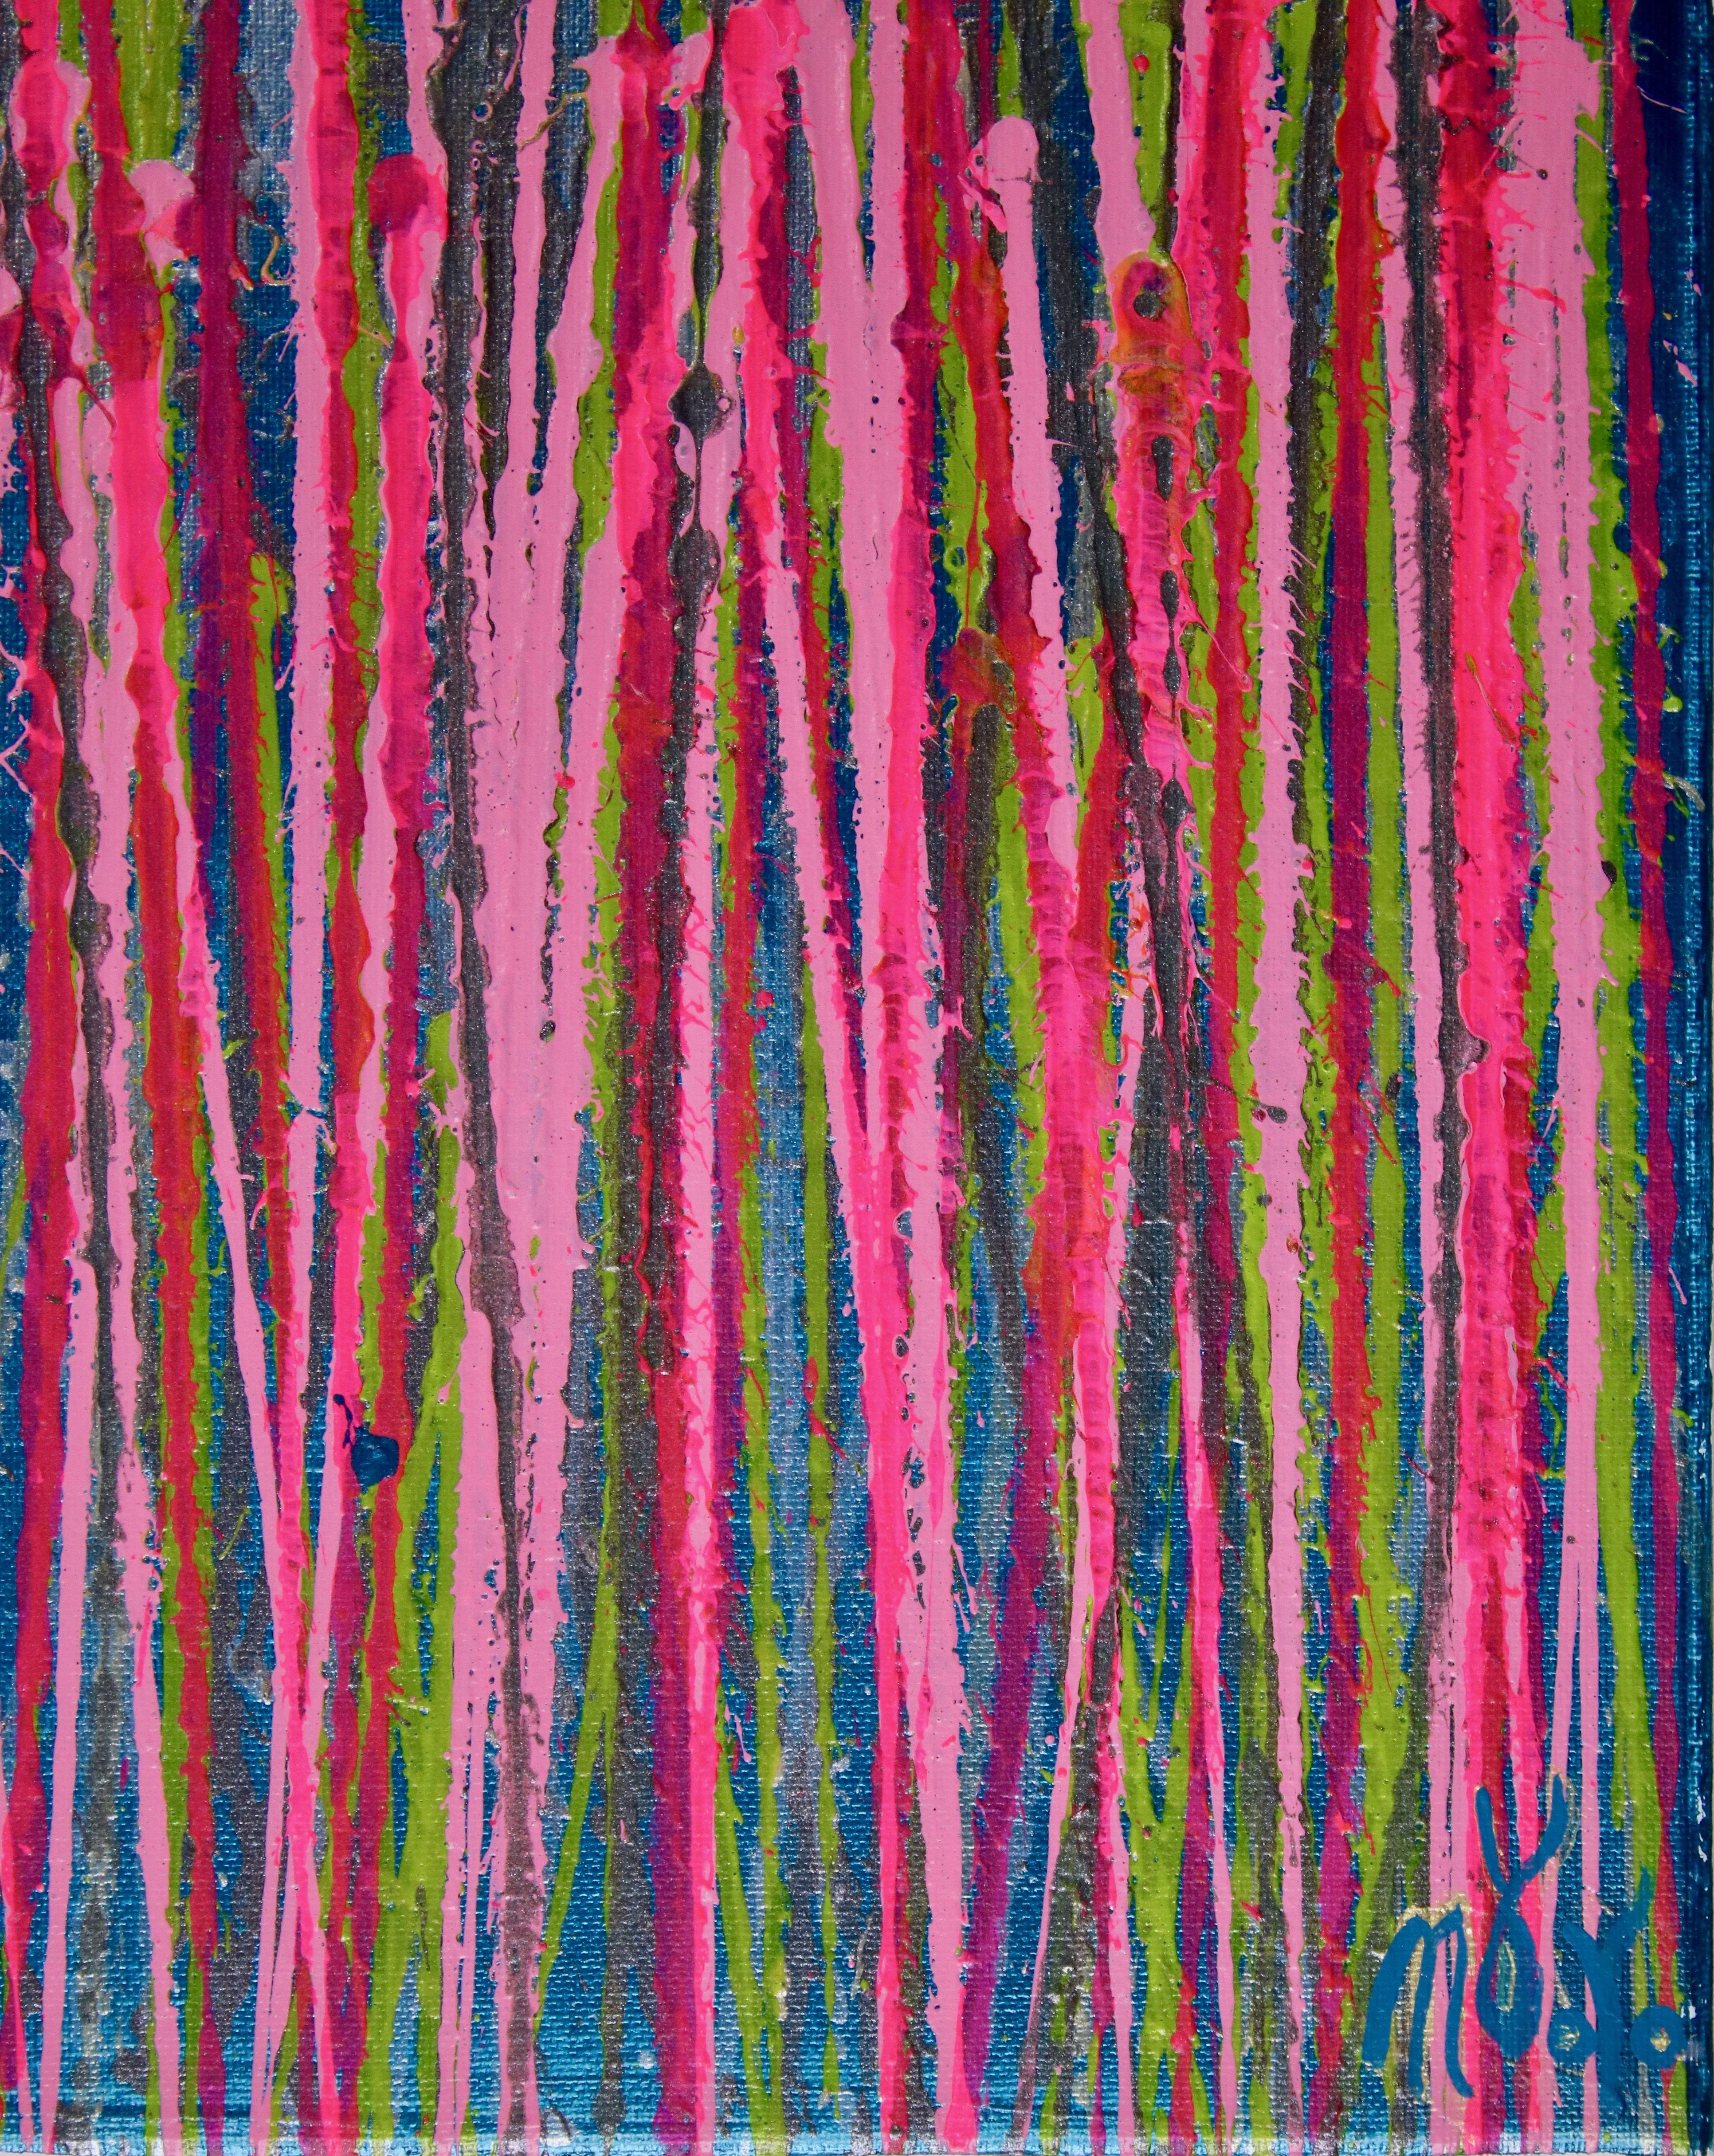 Artist's description: Bright colors! over metallic, Painting, Acrylic on Canvas 2